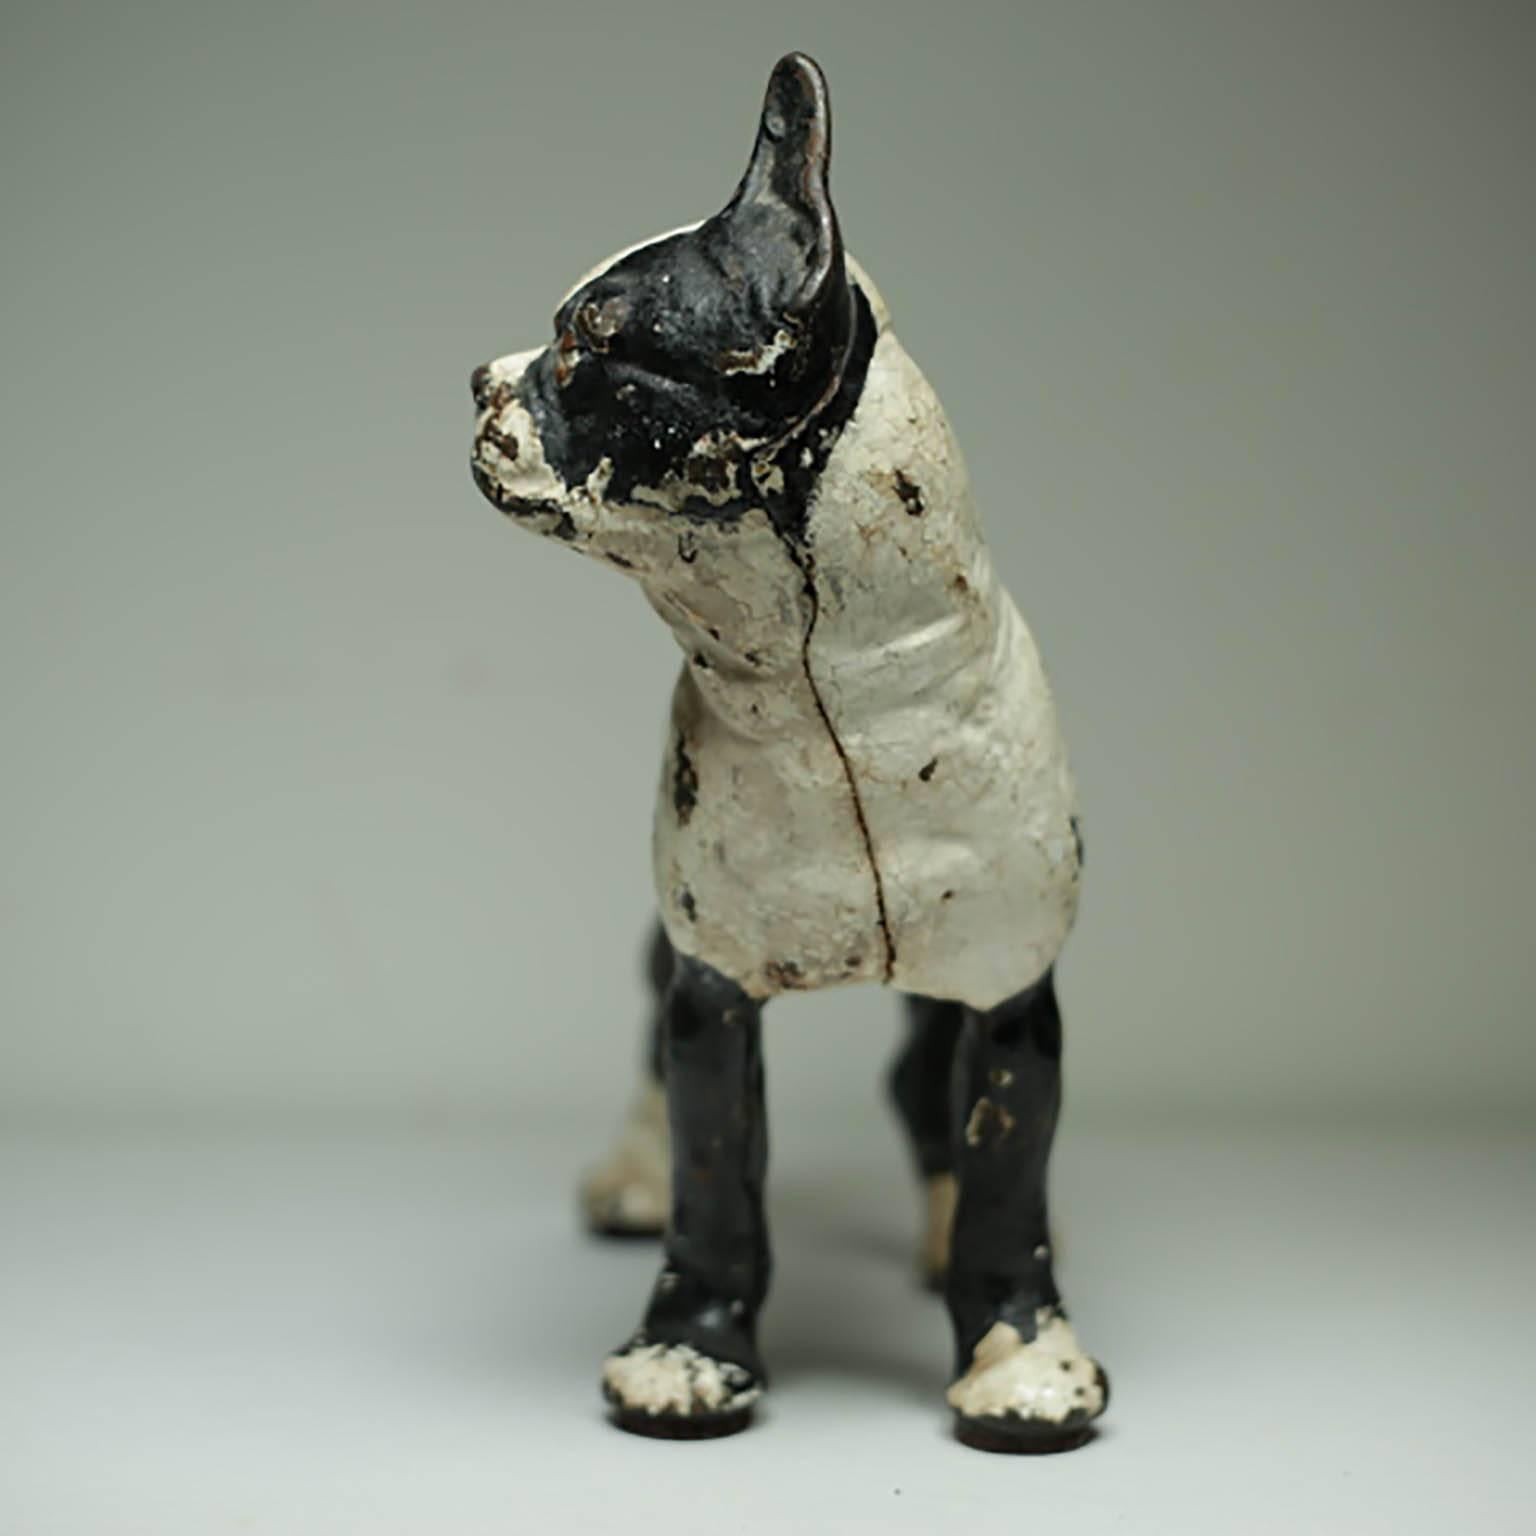 ABOUT

This is an original cast iron Boston Terrier doorstop manufactured by the Hubley Manufacturing Company in Lancaster Pennsylvania USA. The piece has retained its original hand painted finish and is in excellent condition with the appropriate